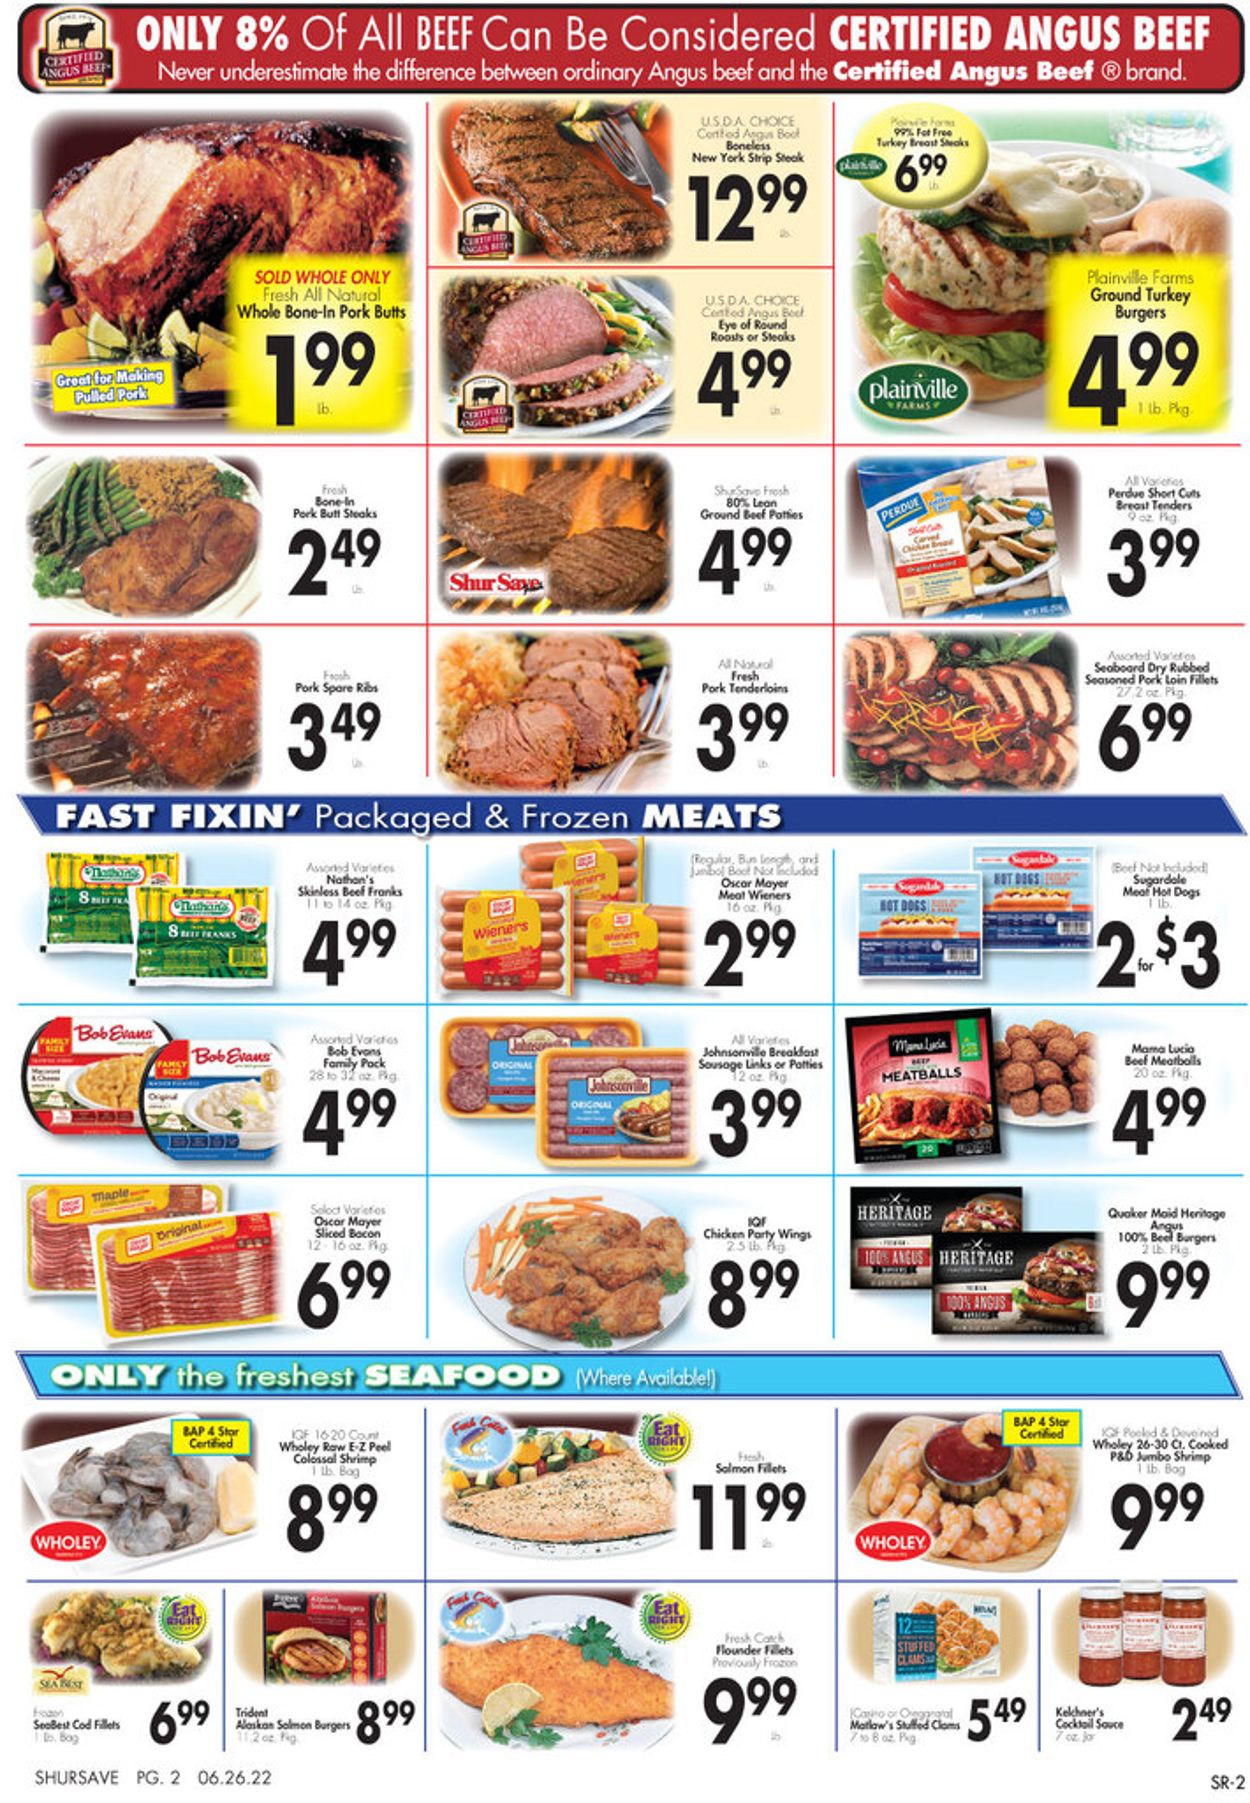 Gerrity's Supermarkets - 4th of July Sale Weekly Ad Circular - valid 06/26-07/02/2022 (Page 4)